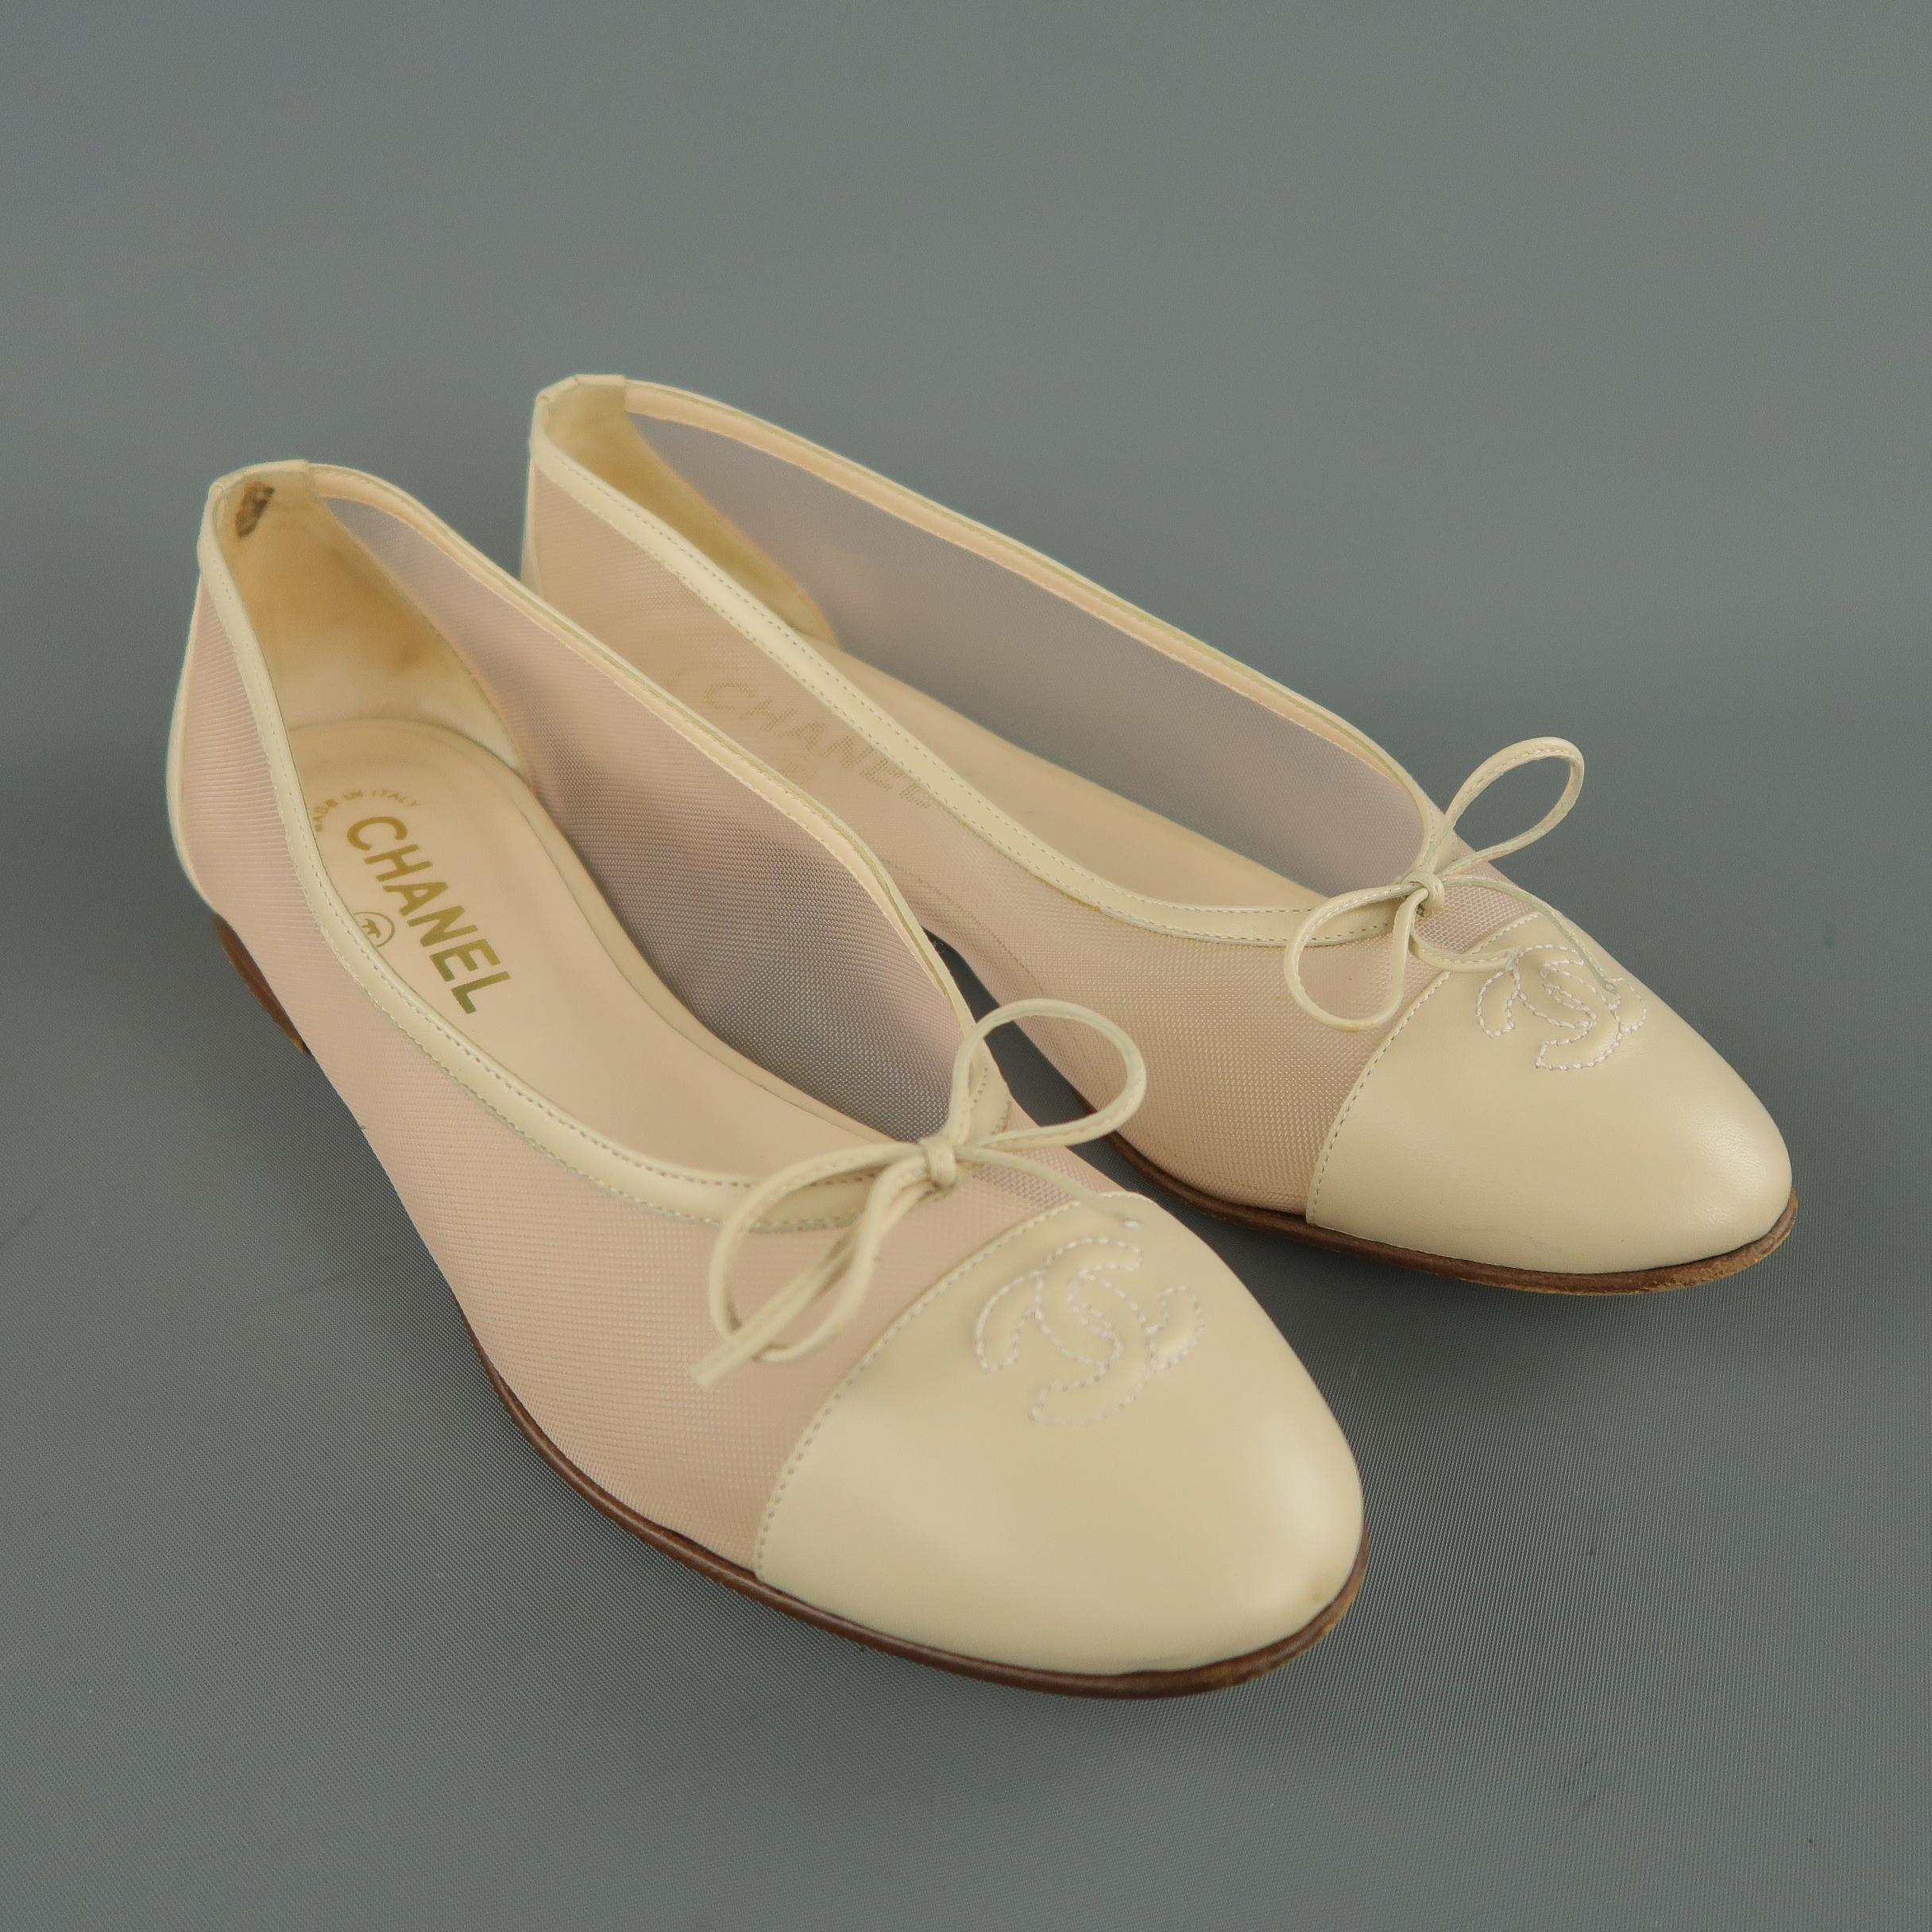 CHANEL ballet flats come in beige leather with a CC embossed cap toe adorned with a bow and pink mesh sides. Made in Italy.

Original retail price $895.00
 
Very Good Pre-Owned Condition.
Marked: IT 38.5
 
Outsole: 10 x 3 in.